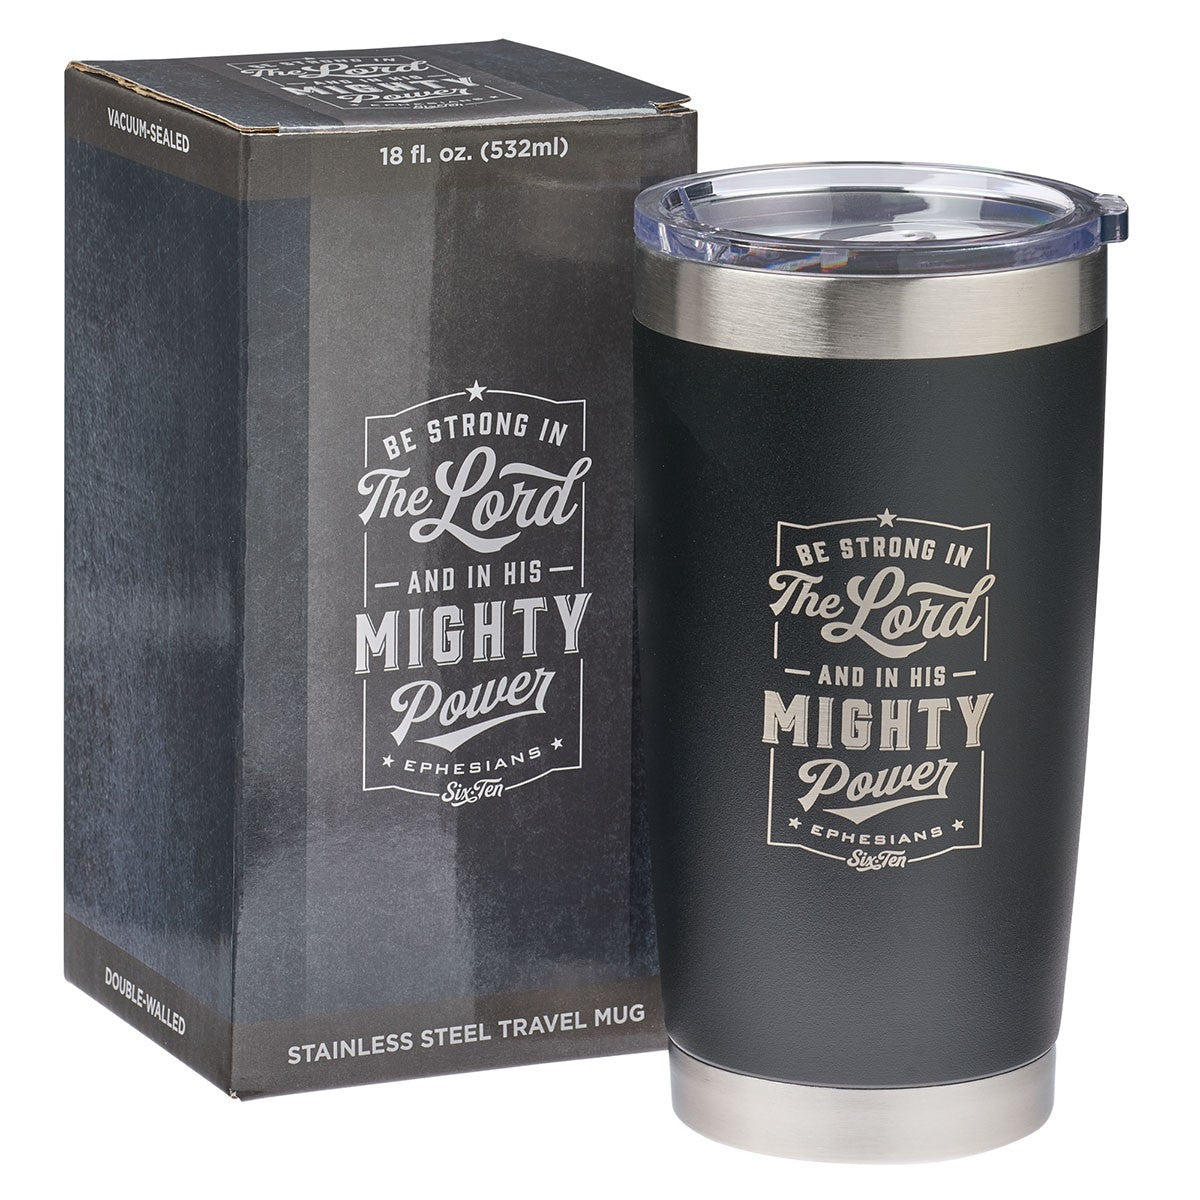 I know the Plans Stainless Steel Travel Mug With Handle - Jeremiah